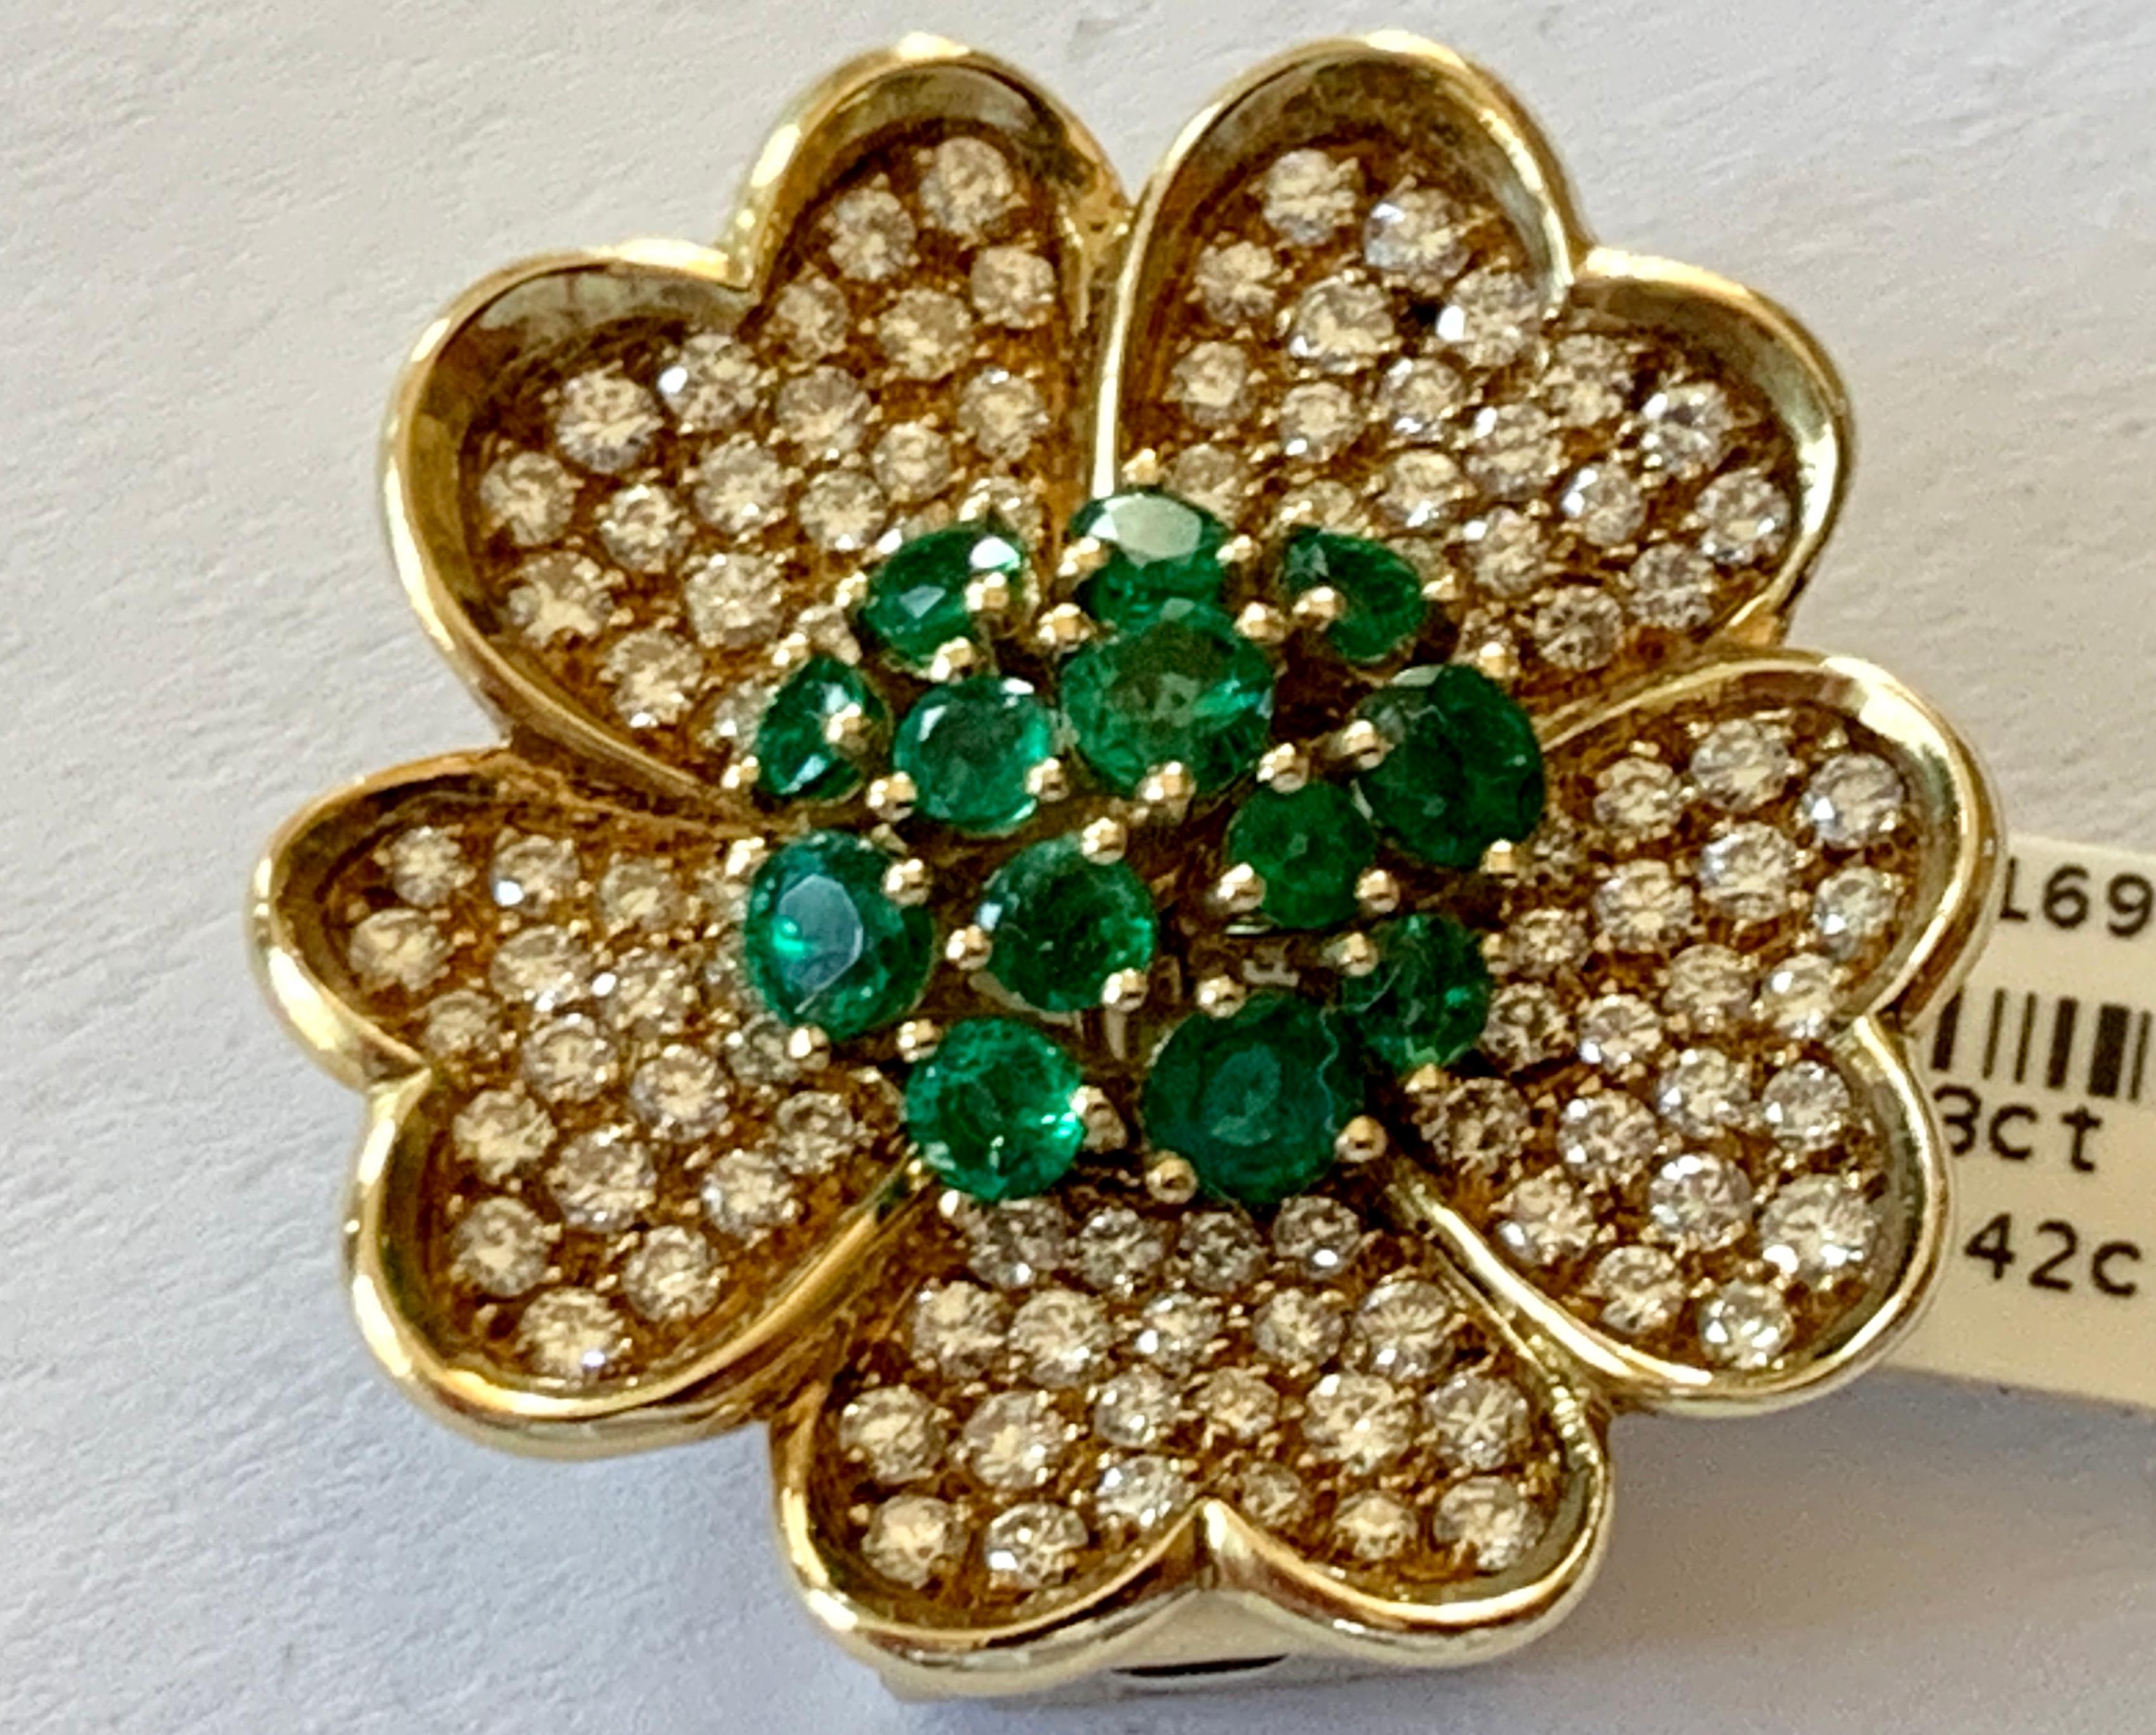 A 1980's  stylized flower brooch/pendant in 18k gold. The brooch is set with Emeralds weighing 1.23 ct and brilliant cut Diamonds totaling 1.42 ct. 